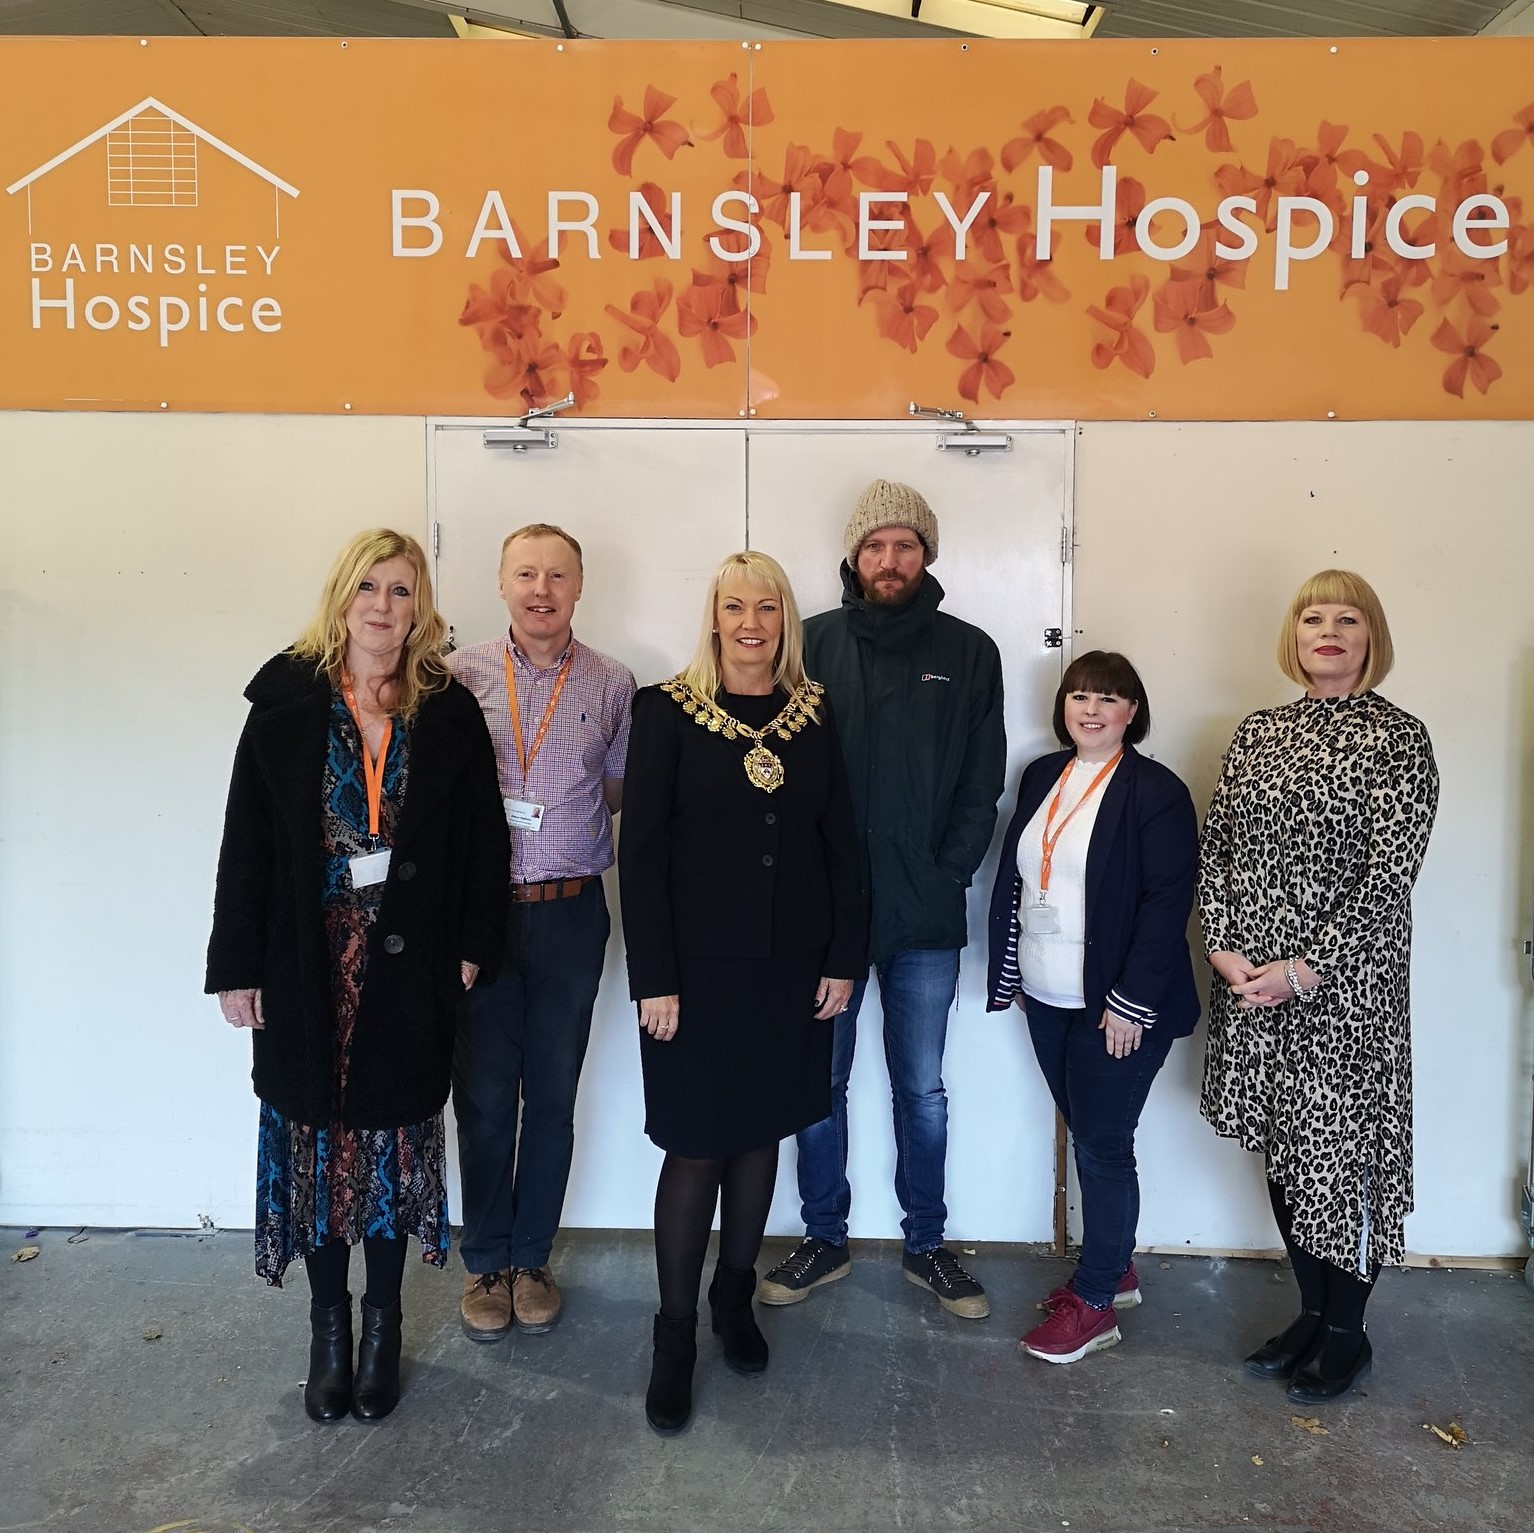 A group photo of Barnsley Hospice staff and the Mayor of Barnsley who is visiting the Hospice Retail Hub.